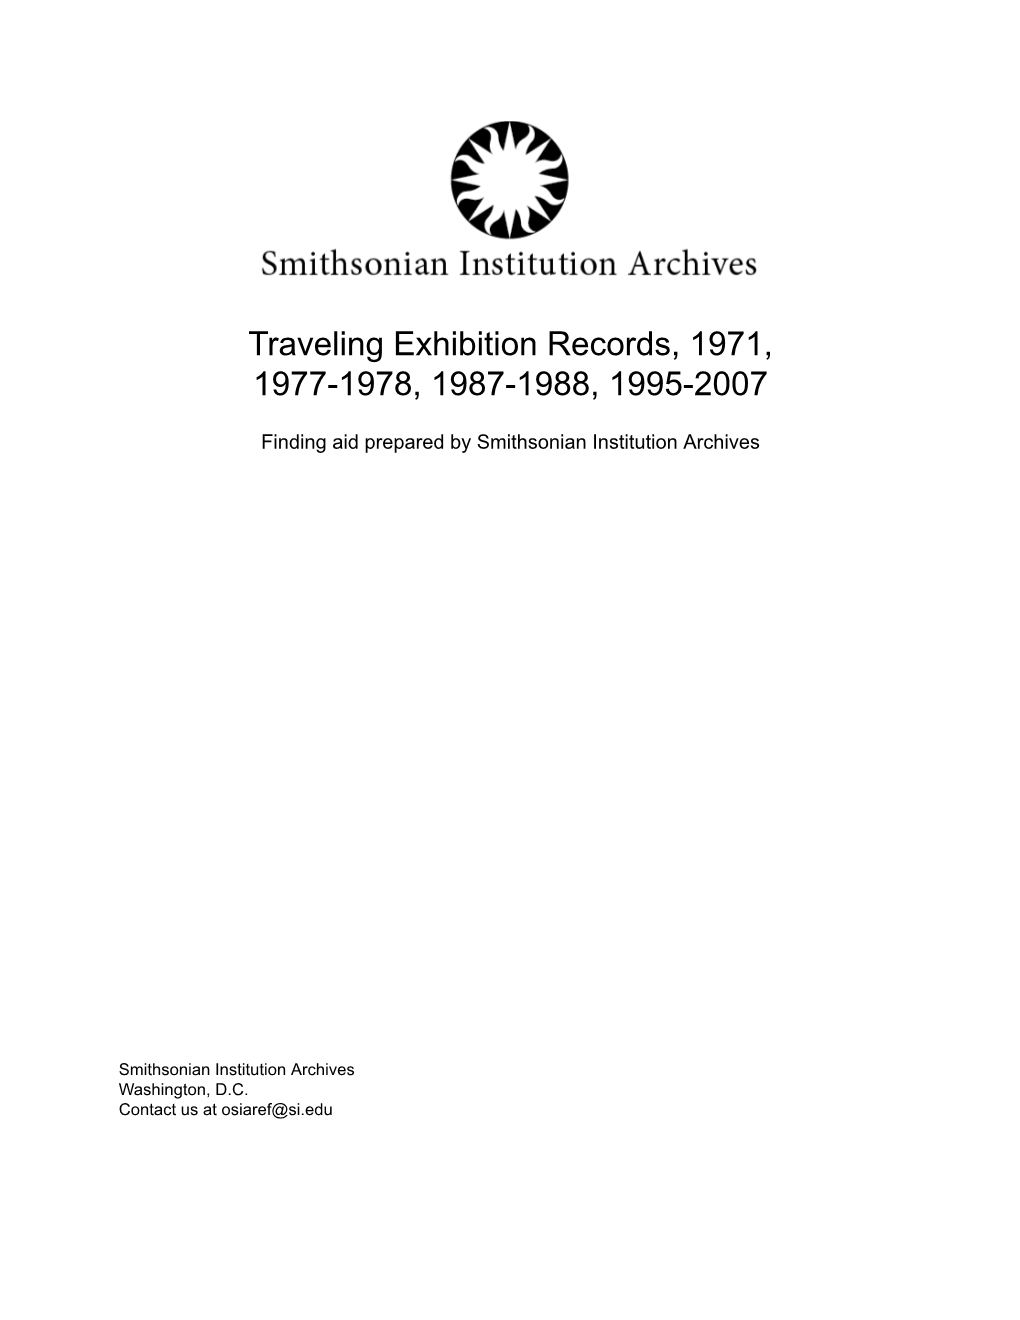 Traveling Exhibition Records, 1971, 1977-1978, 1987-1988, 1995-2007